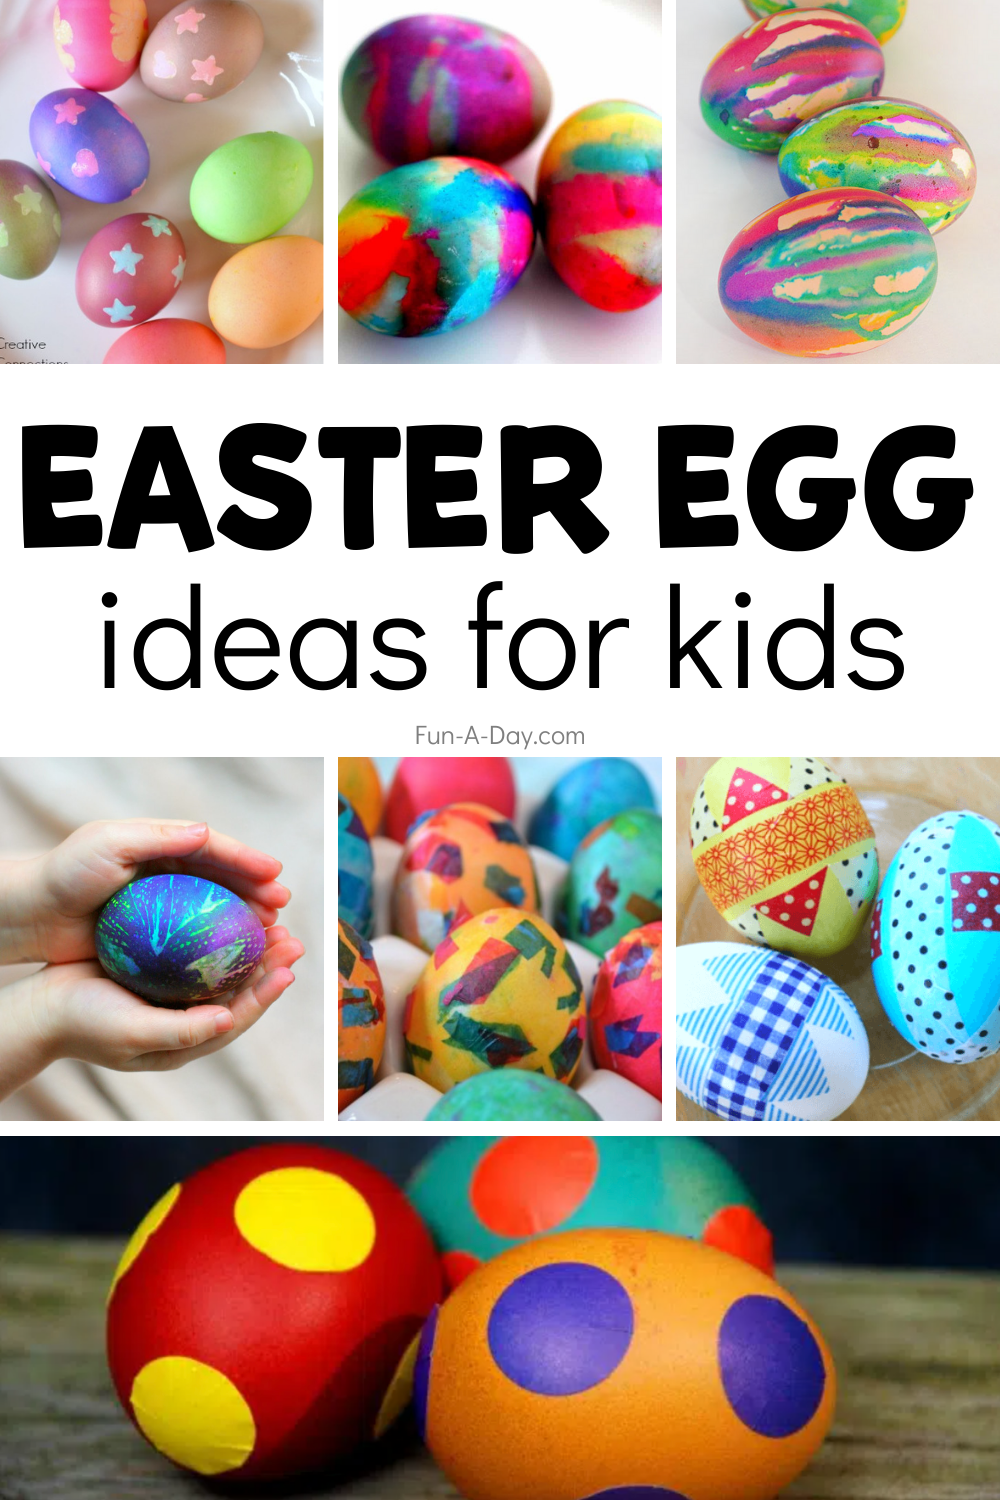 Easter Egg Ideas Perfect for Preschoolers - Fun-A-Day!